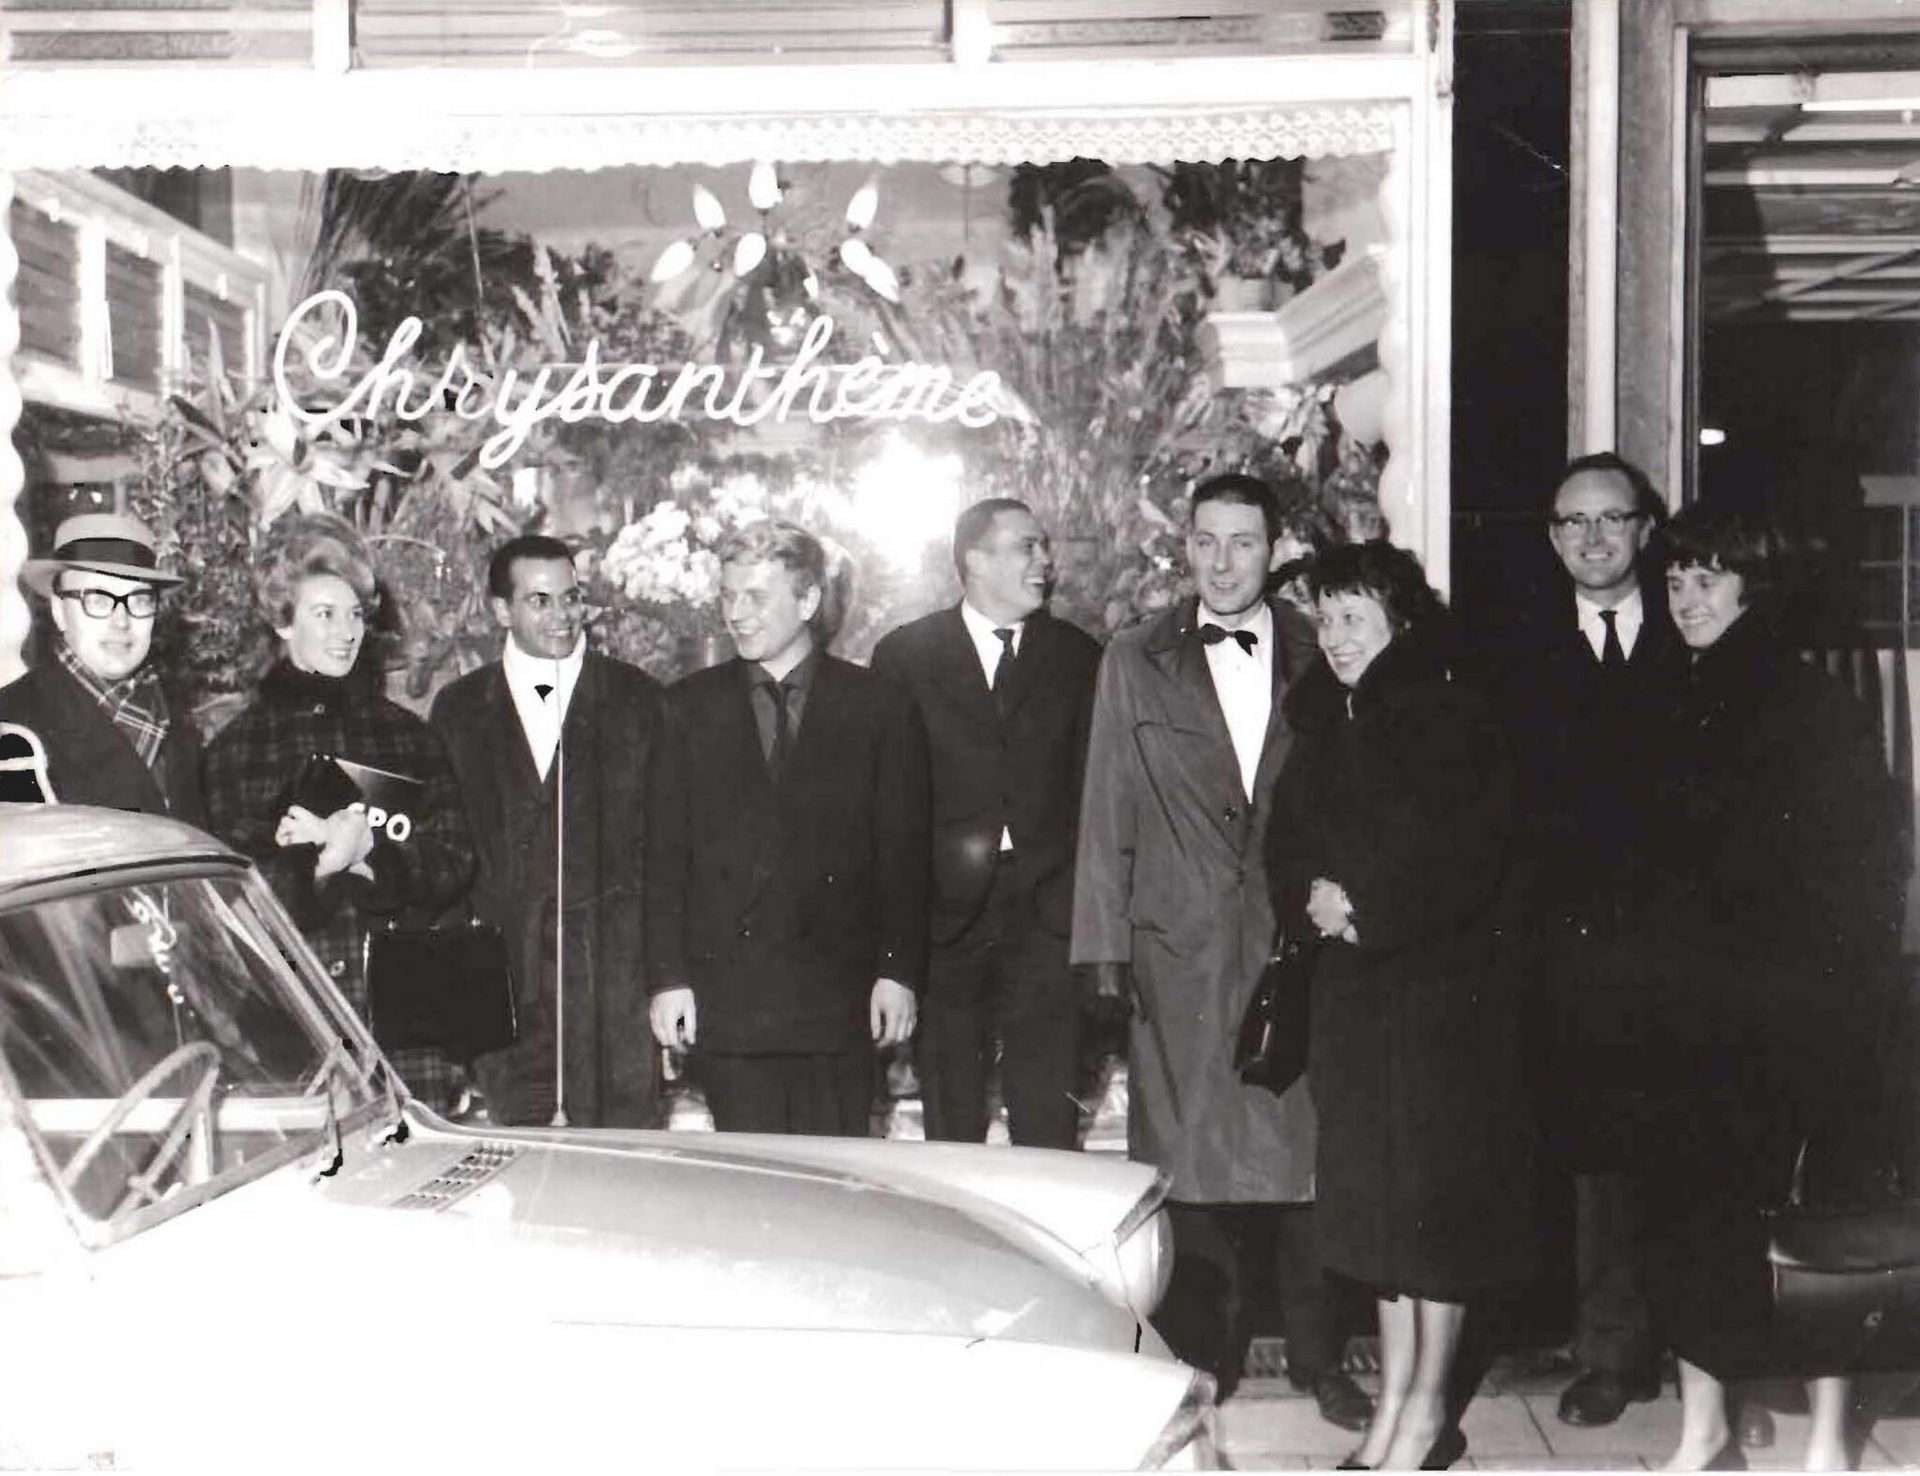 After the vernisage of the exhibition Piene, Mack, Uecker at Palais des Beaux Arts - Brussels 1/12/1962 (DYNAMO)